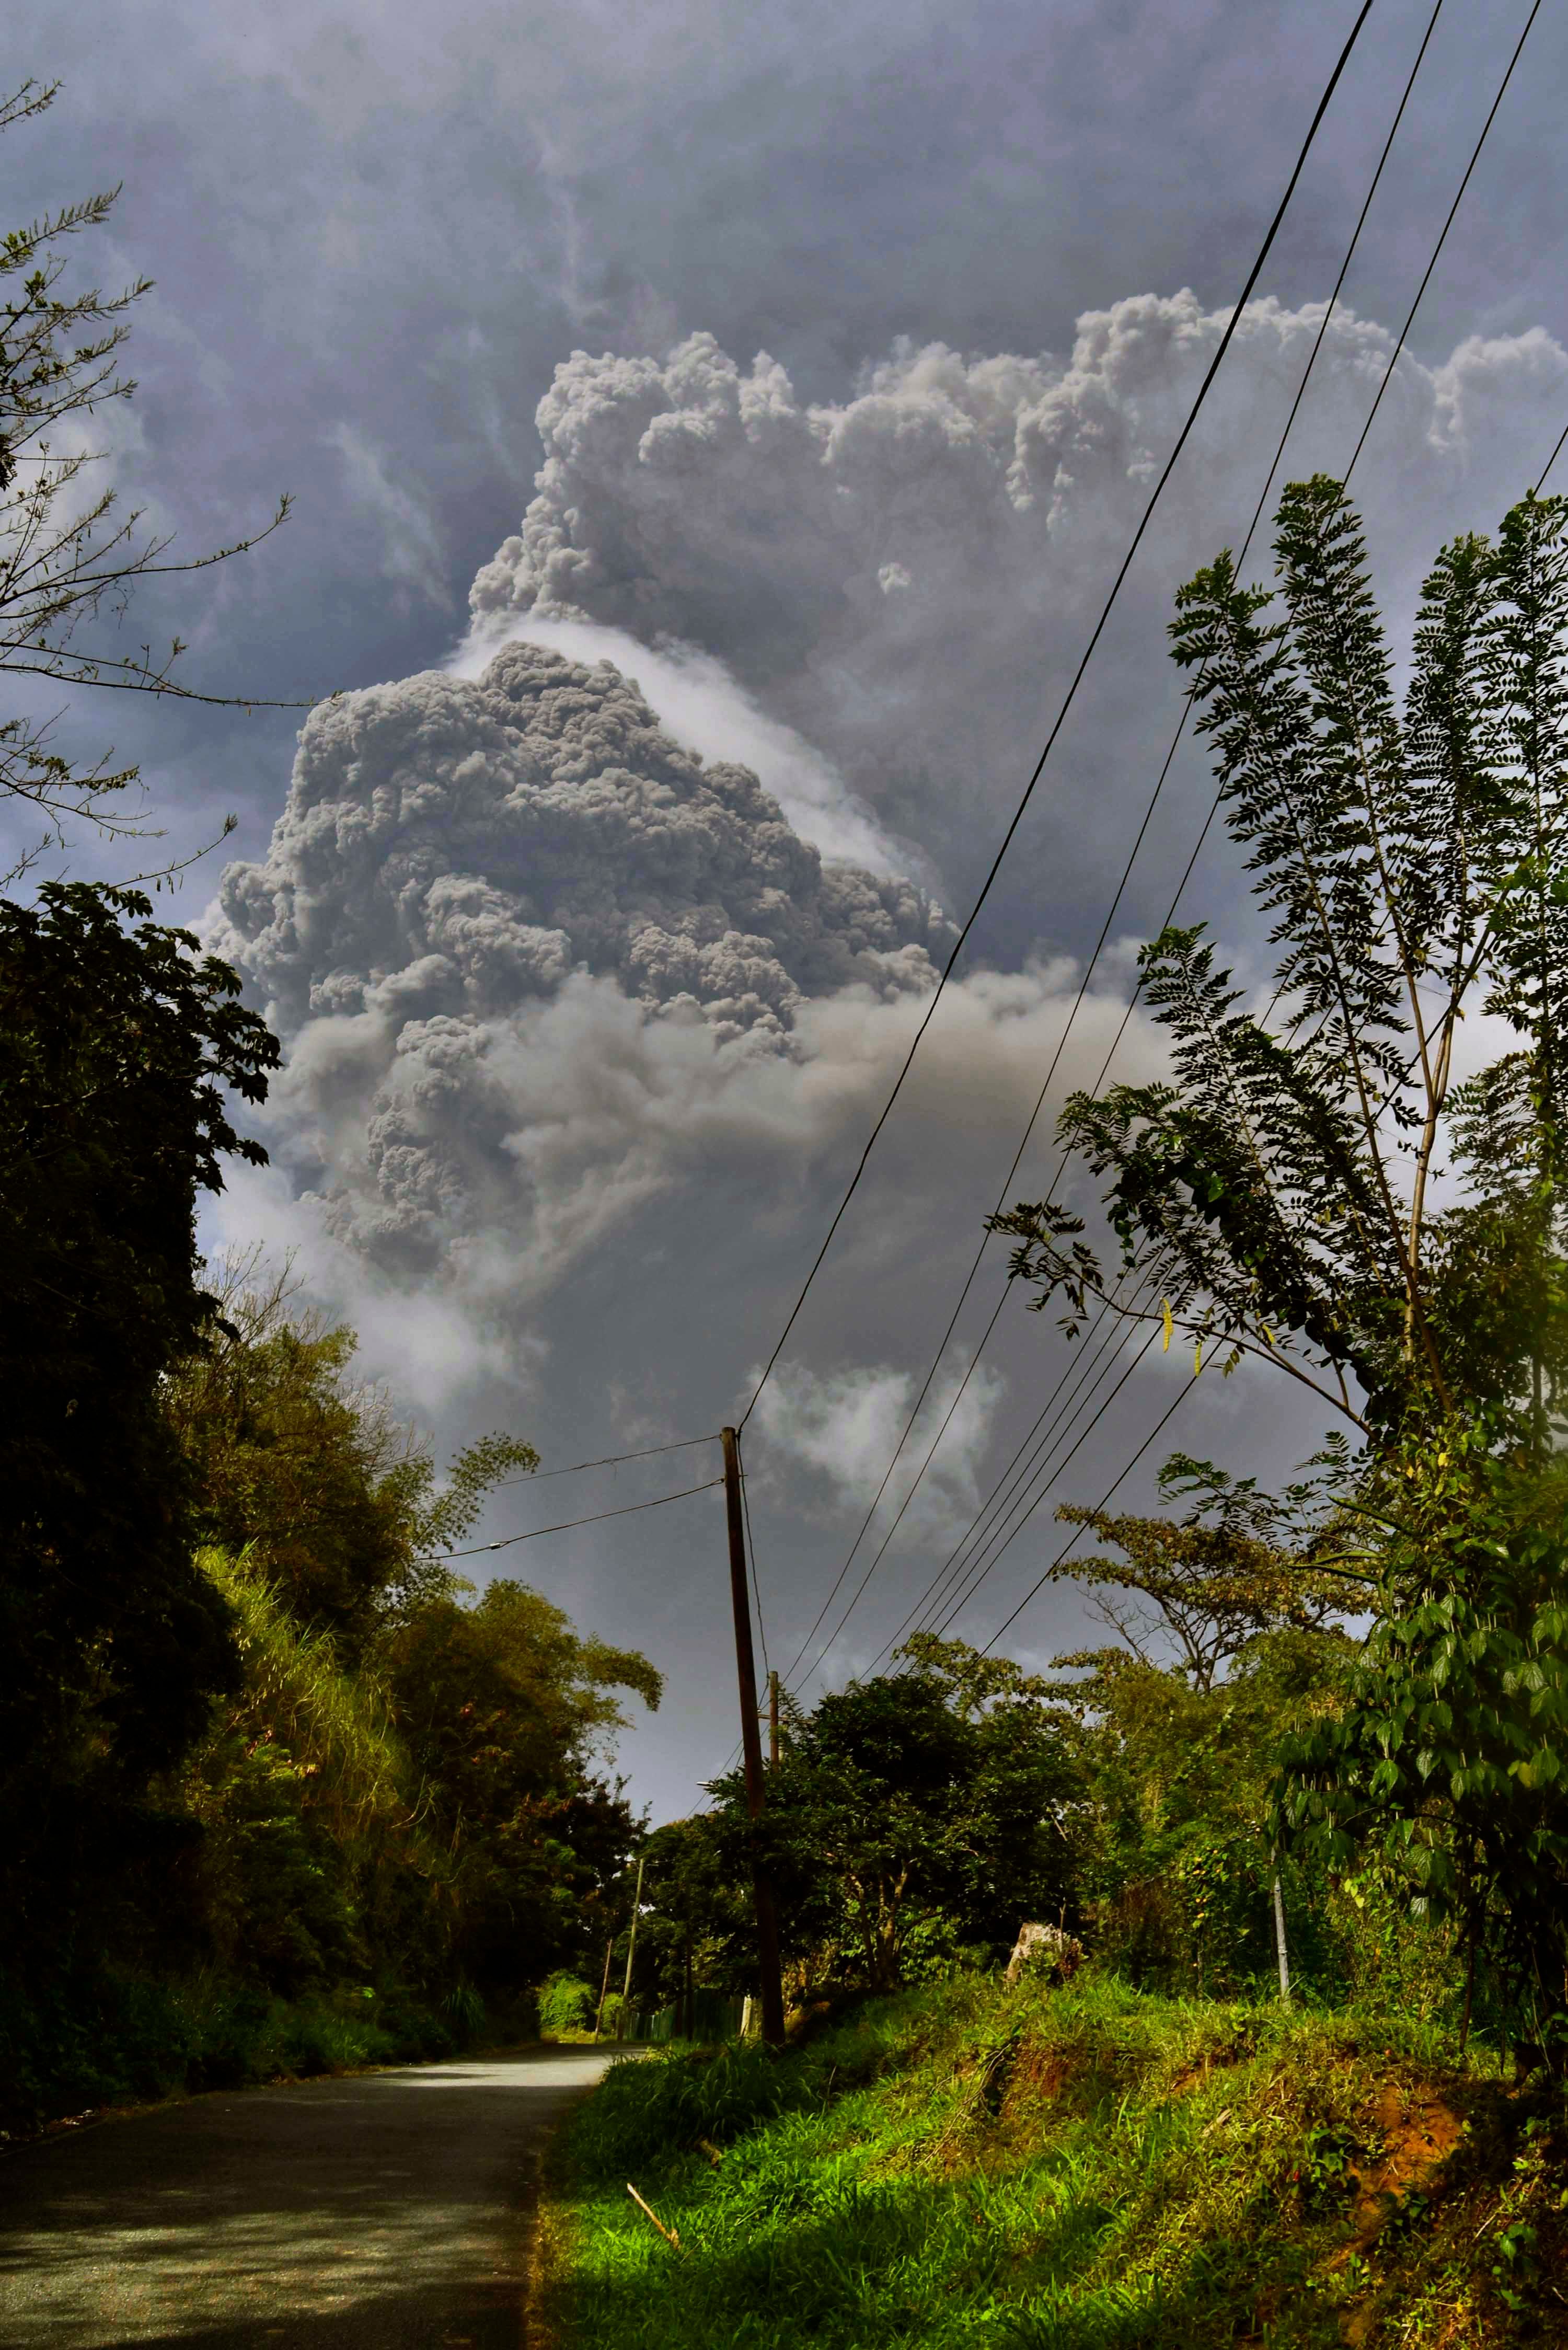 Plumes of ash rise from the La Soufriere volcano as it erupts on the eastern Caribbean island of St. Vincent, as seen from Ch